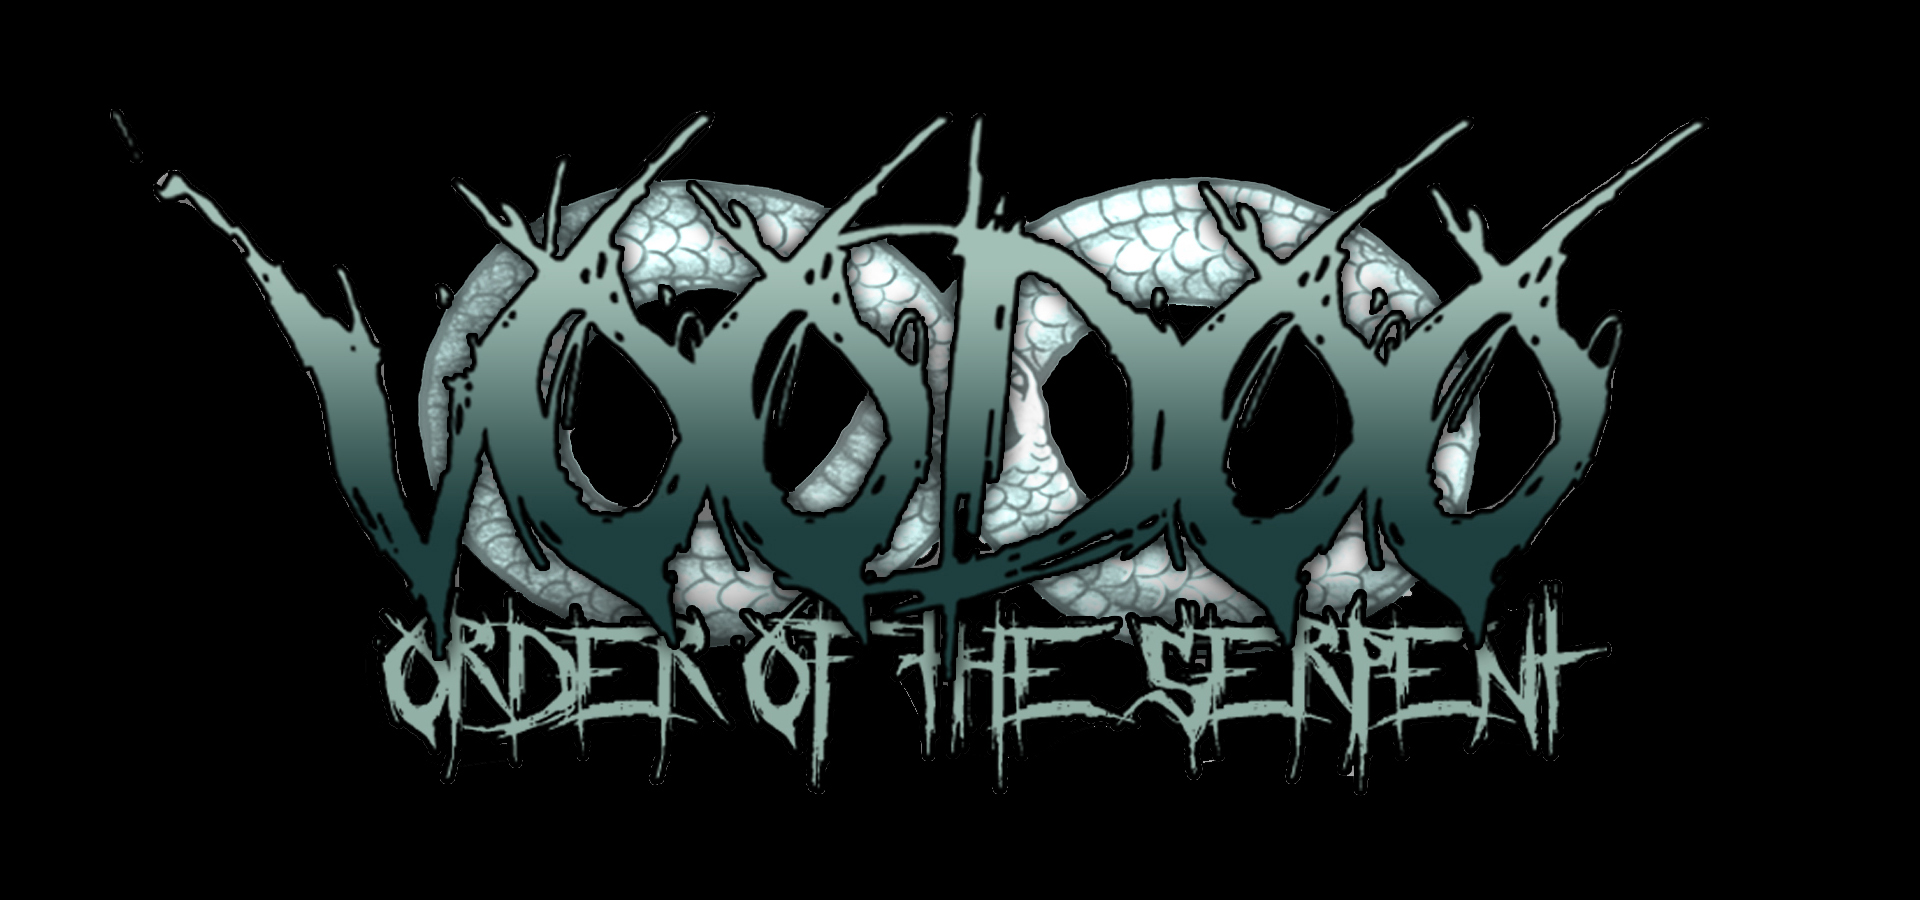  Voodoo: Order of the Serpent (Image courtesy of Knott's Scary Farm) 